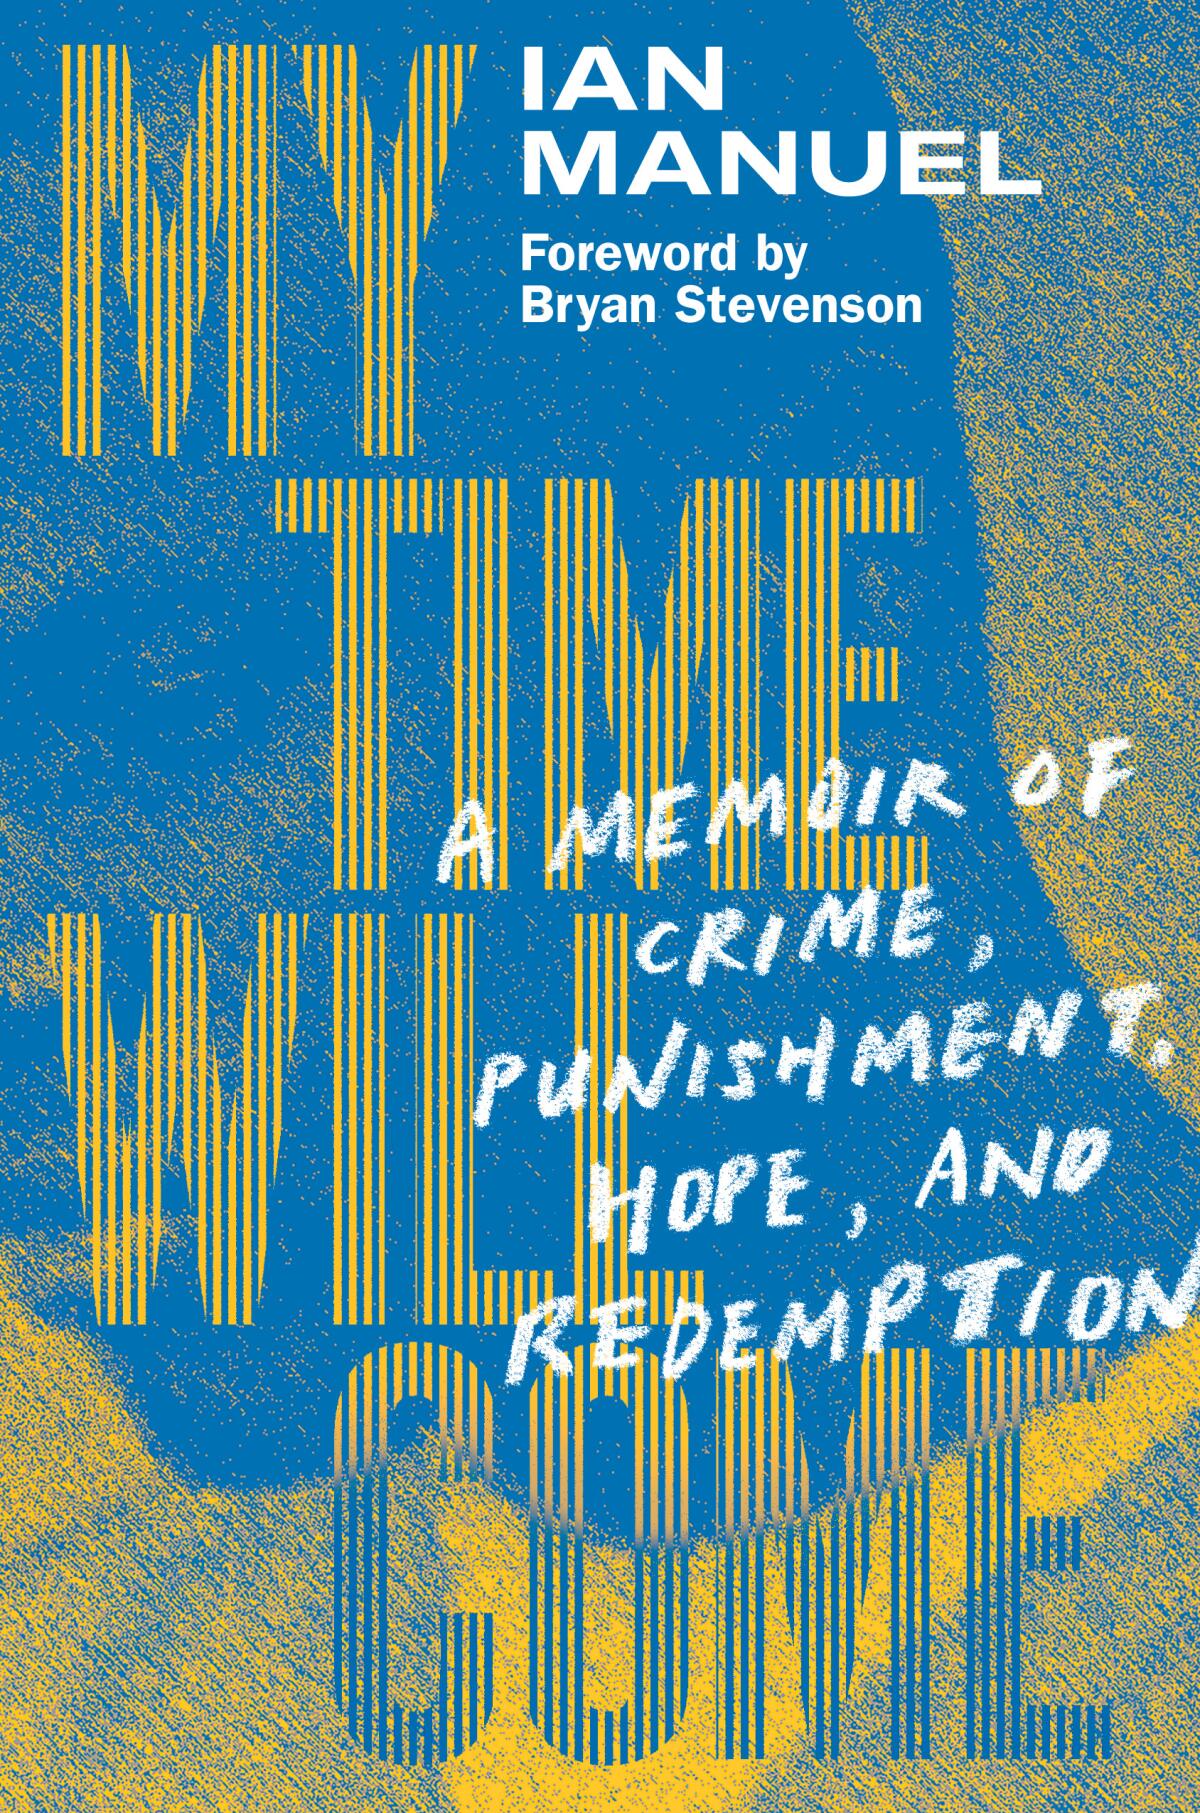 Jacket for Ian Manuel's memoir, "My Time Will Come: A Memoir of Crime, Punishment, Hope, and Redemption."